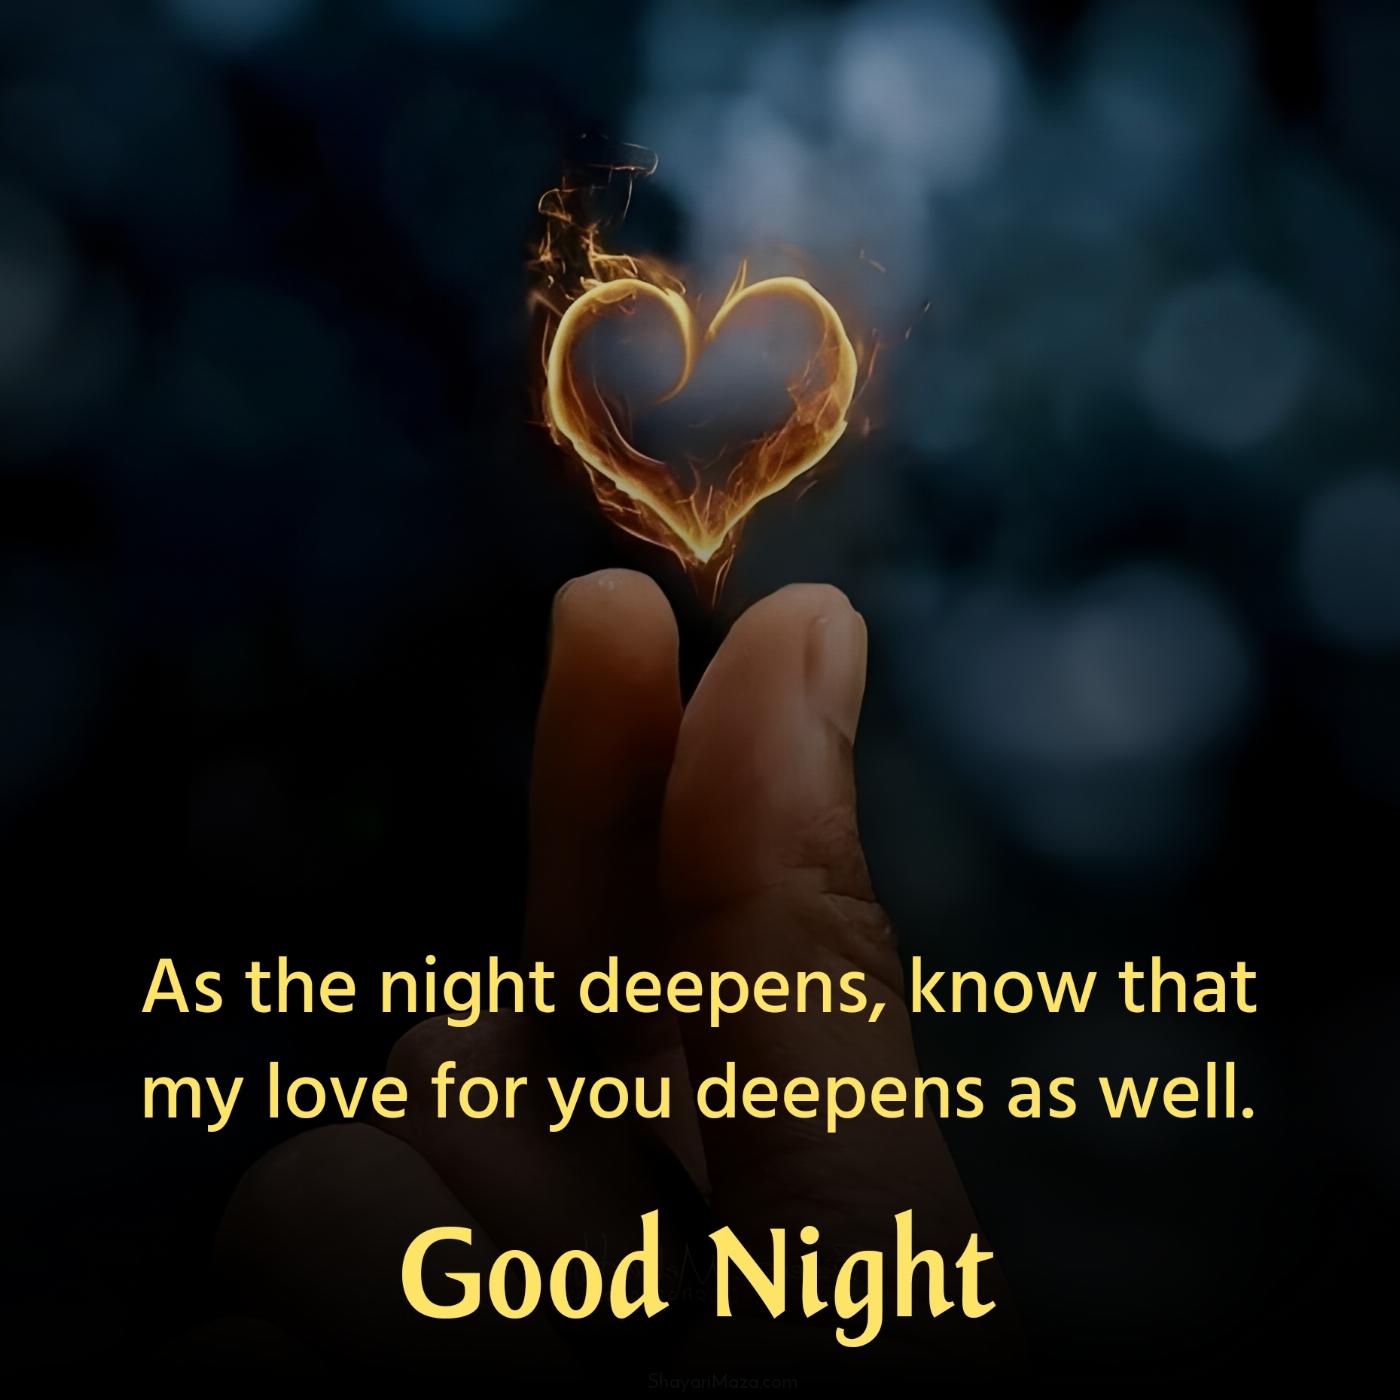 As the night deepens know that my love for you deepens